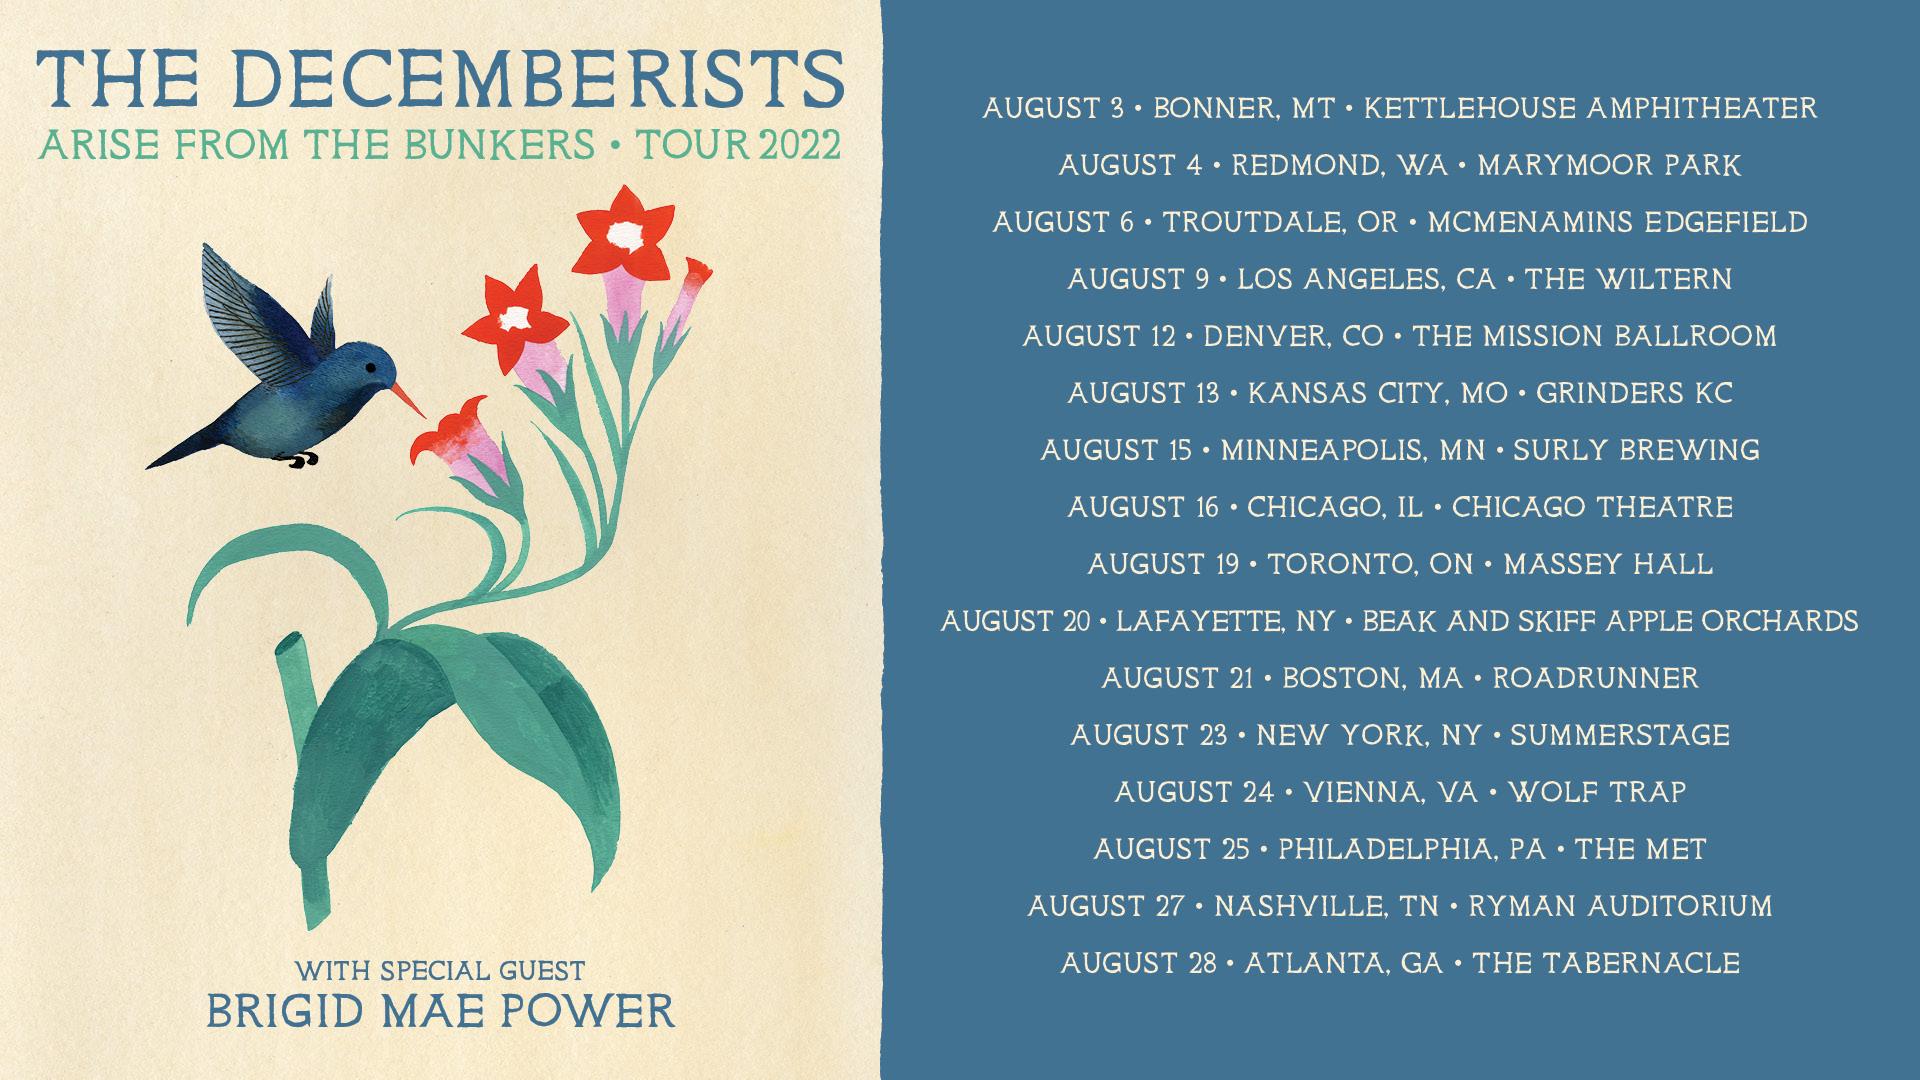 THE DECEMBERISTS ANNOUNCE TOUR DATES ARISE FROM THE BUNKERS! 2022 TOUR